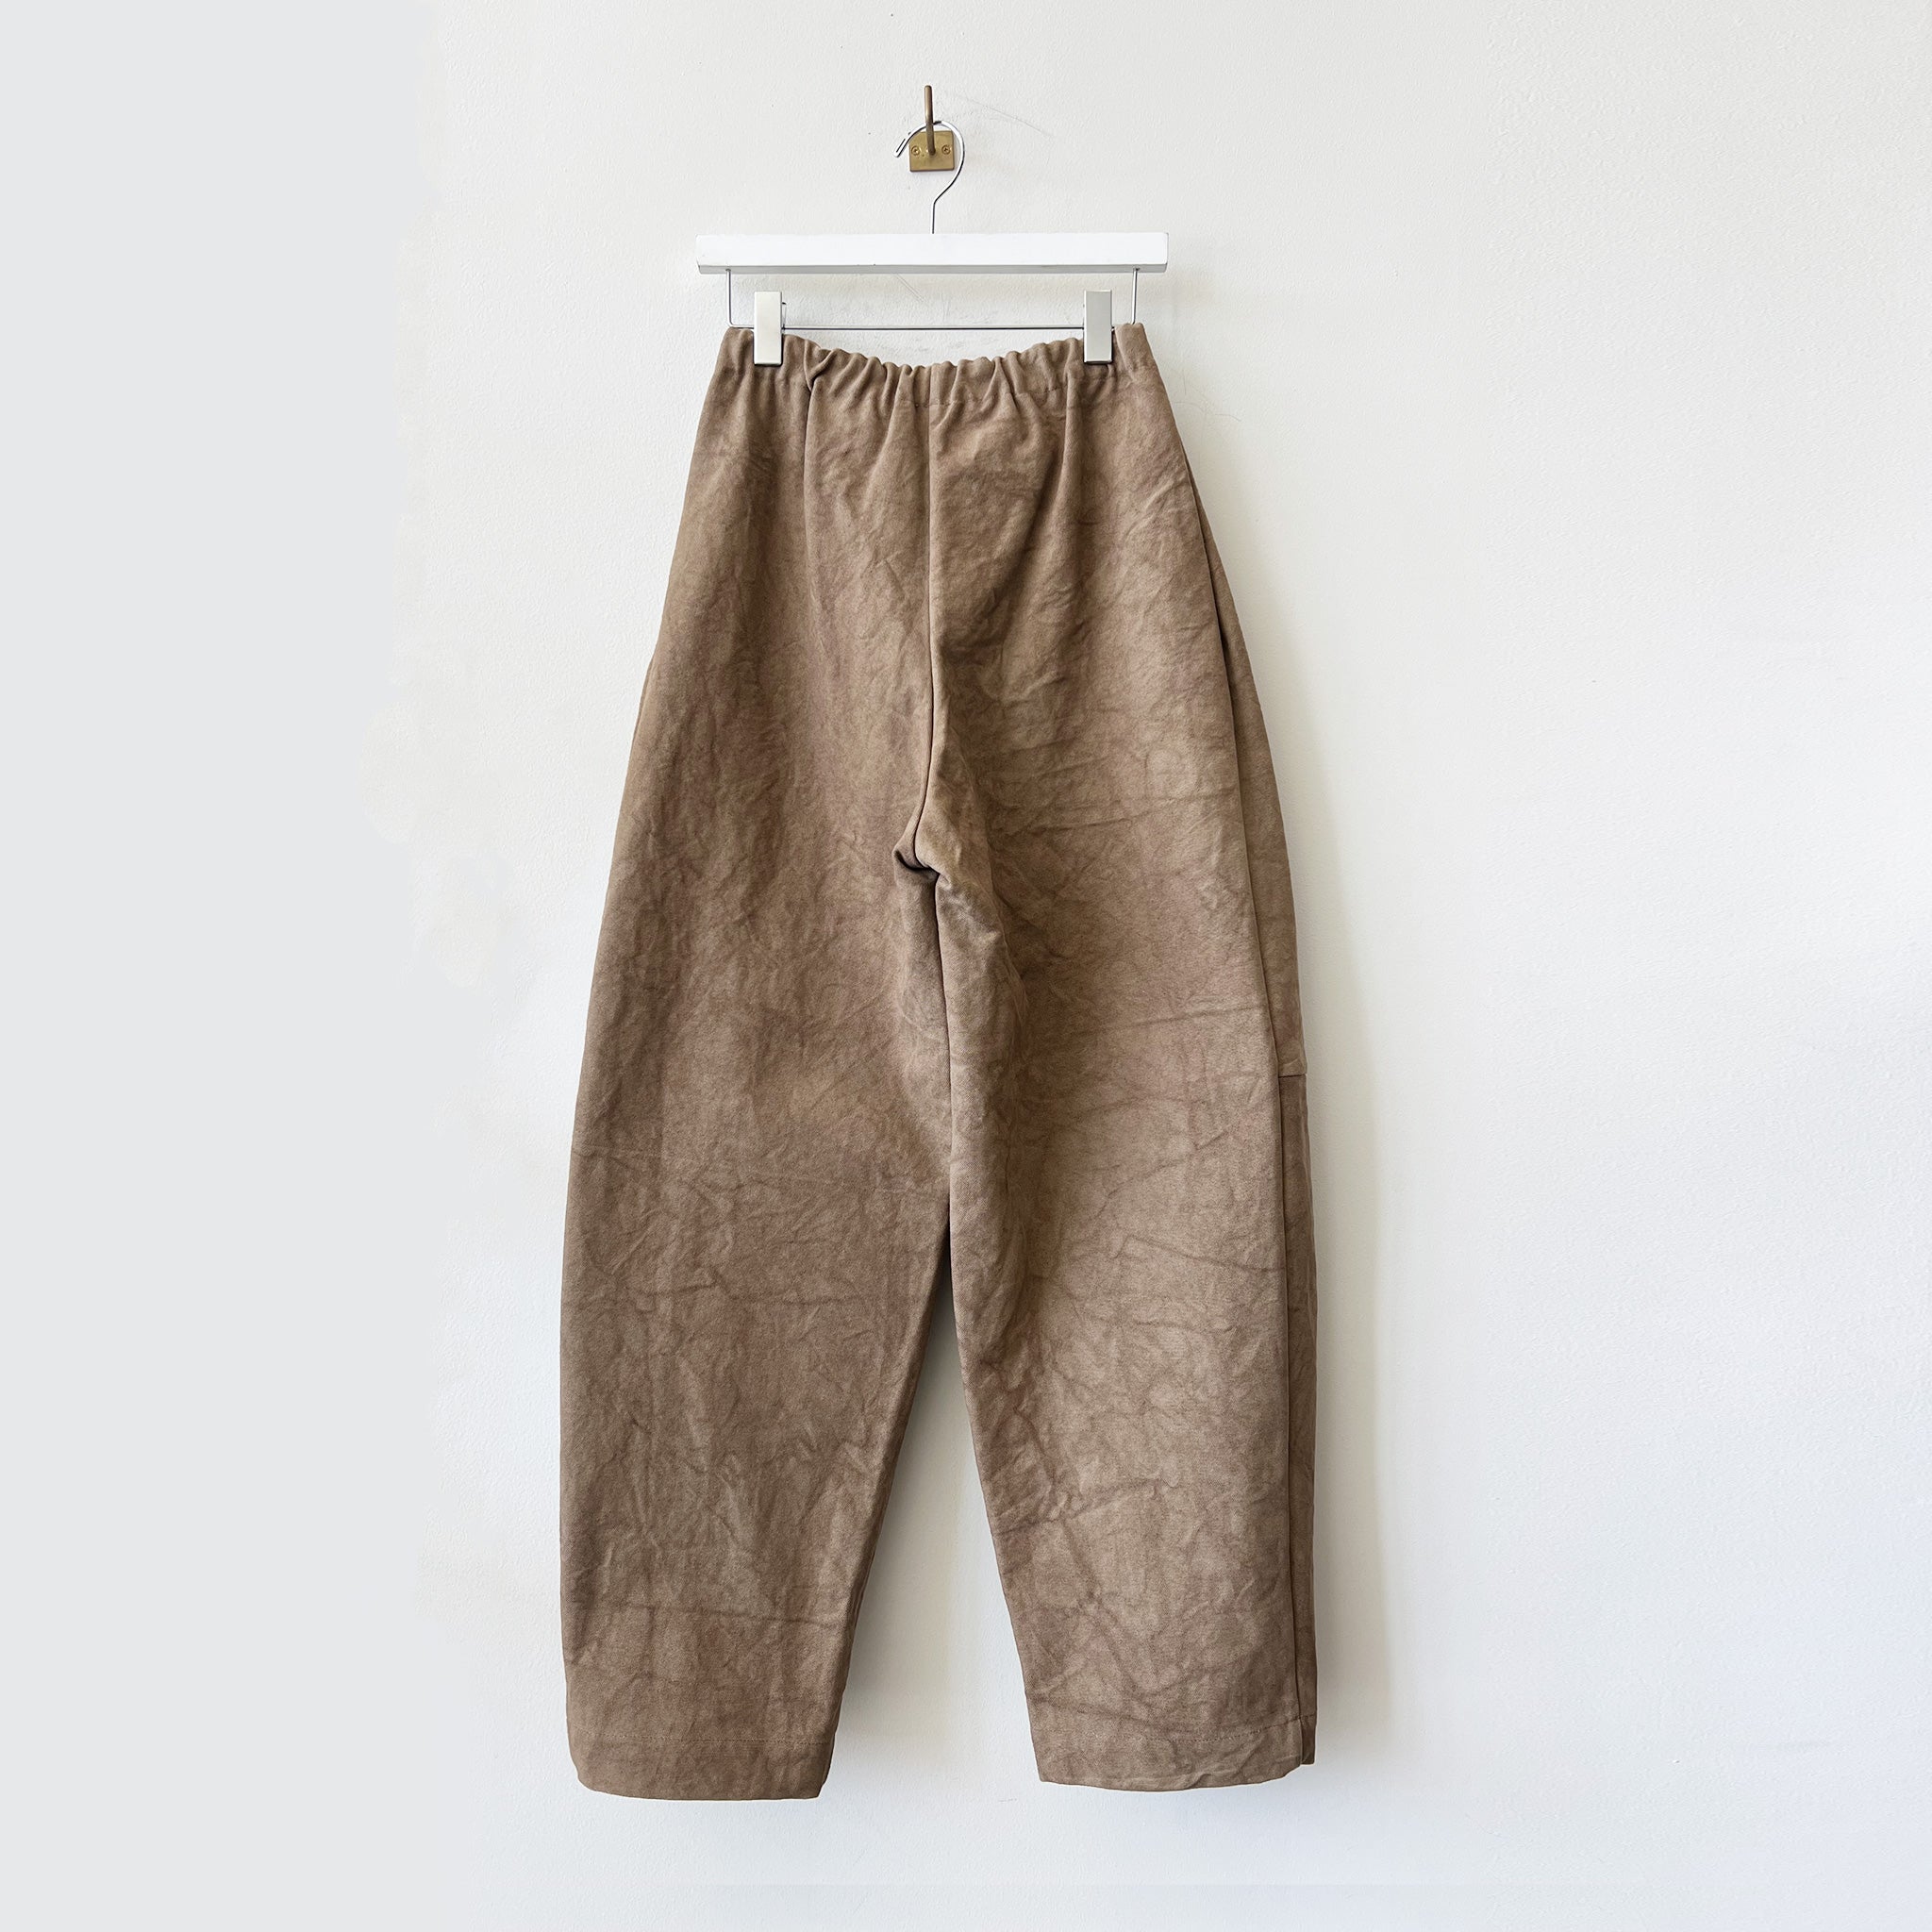 Brown crinkled cotton canvas pants with stitching across the knee and an exaggerated balloon-like shape - back view.